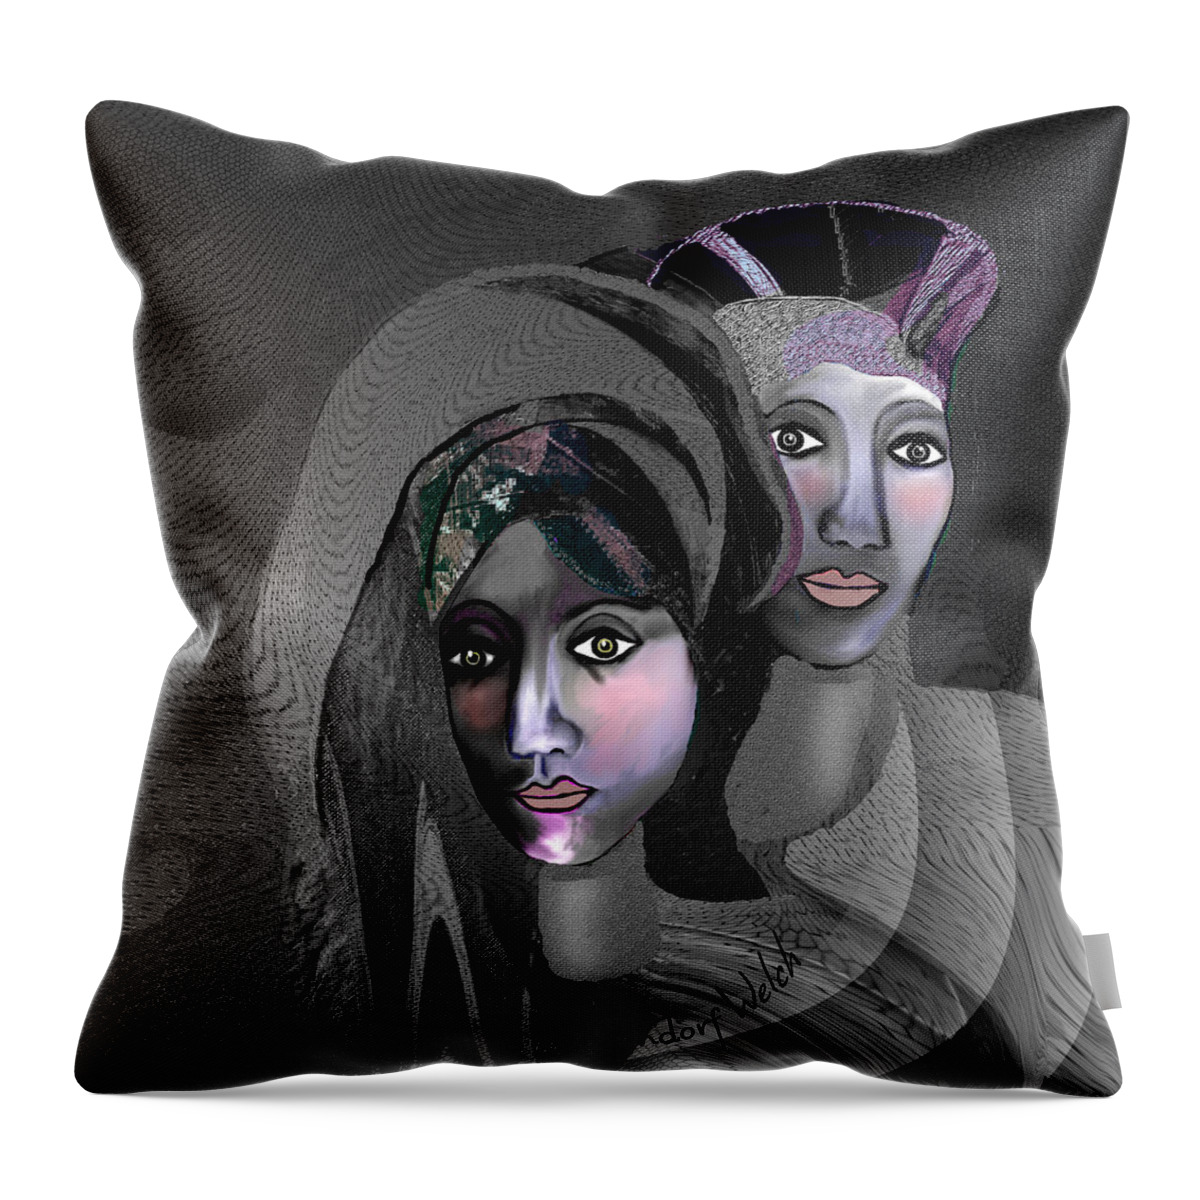 1973 - Exotic 2017 Throw Pillow featuring the digital art 1973 - Exotic 2017 by Irmgard Schoendorf Welch